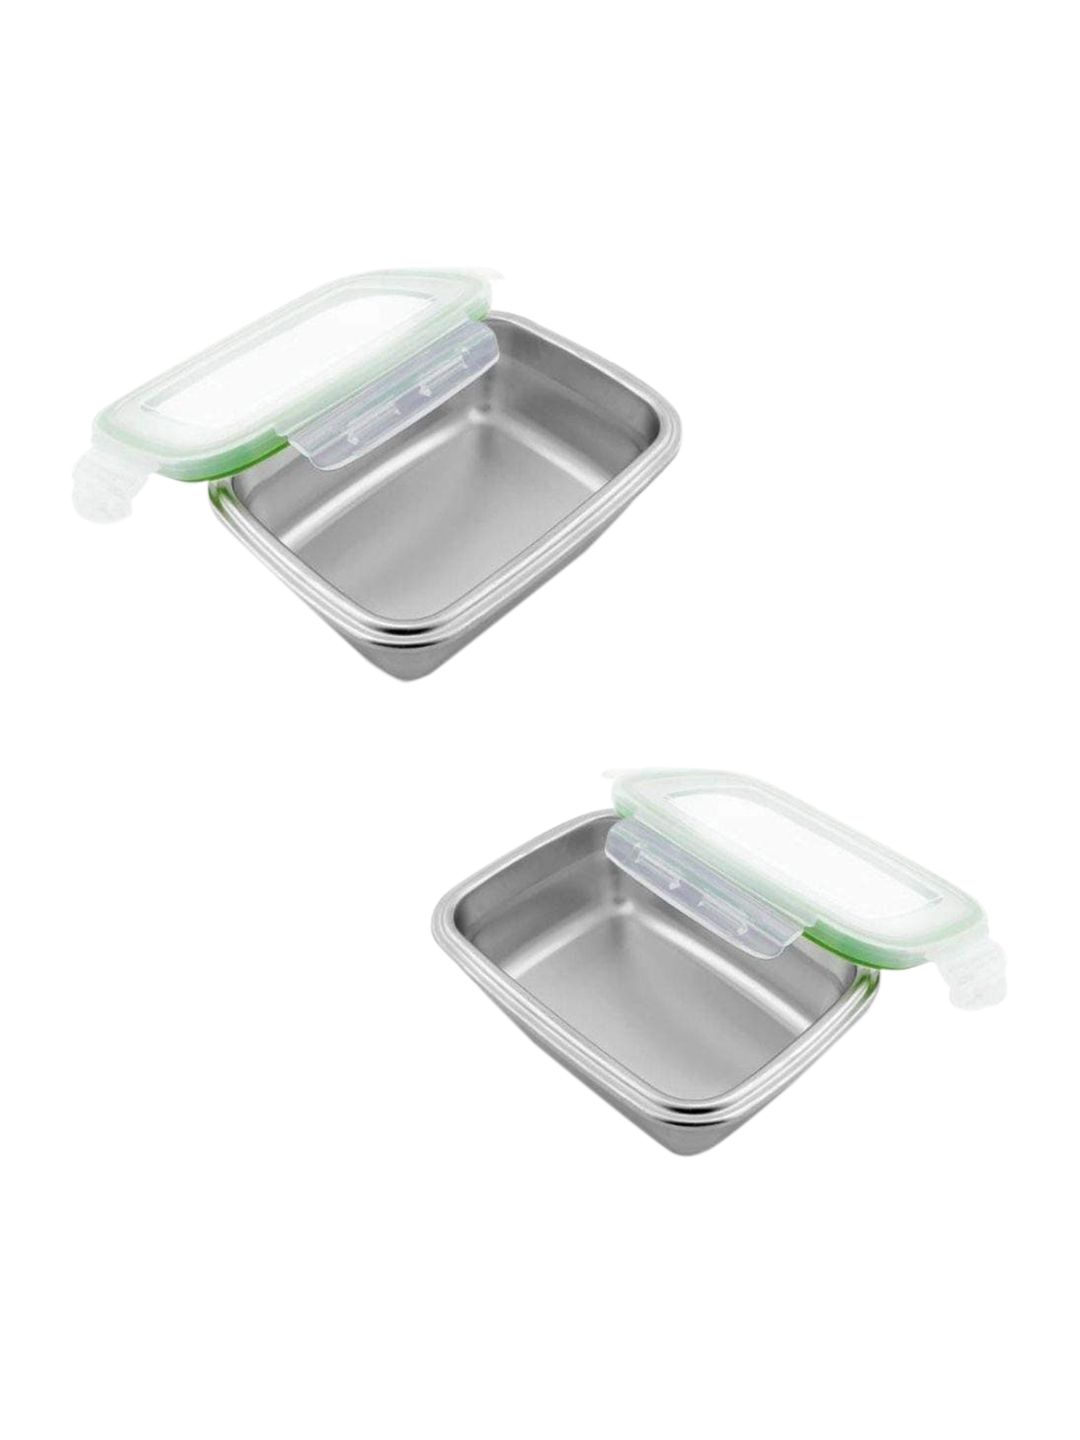 Femora Set Of 3 Silver-Toned & Green Stainless Steel Storage Containers Price in India